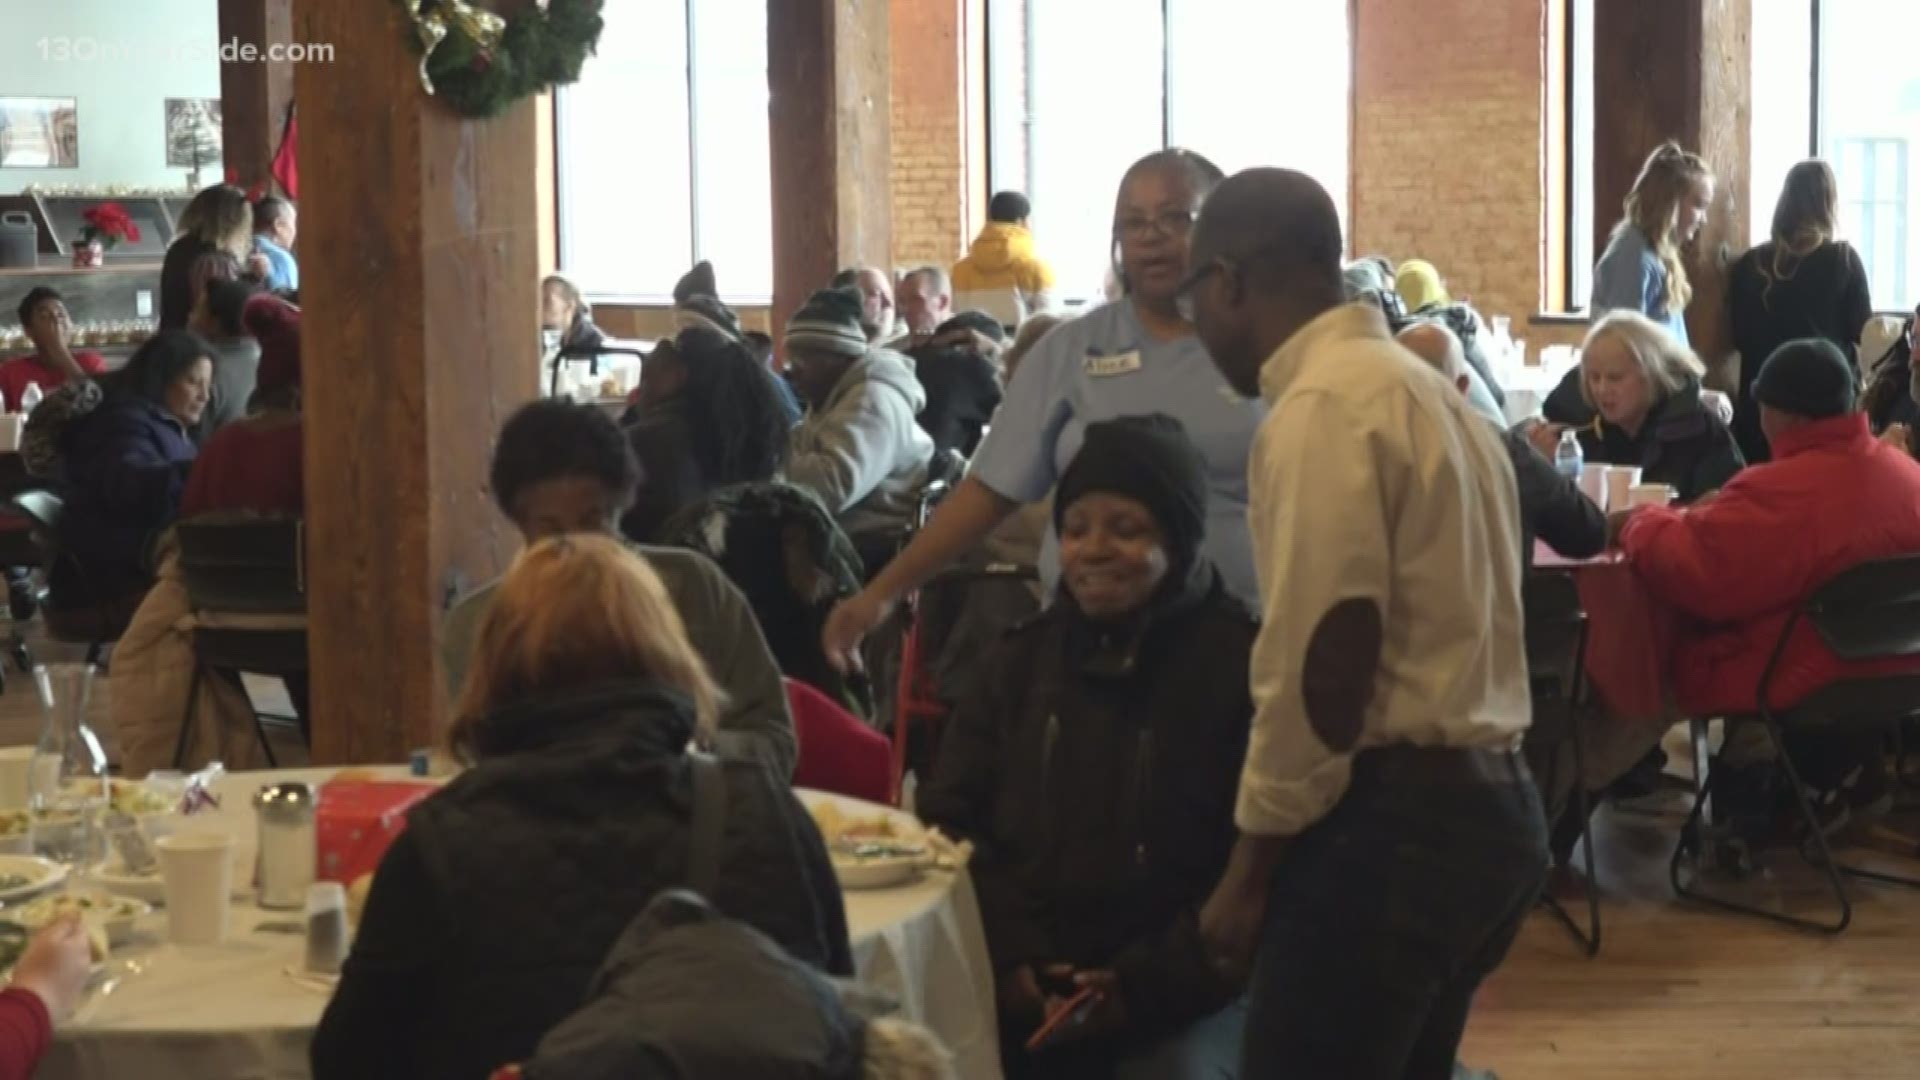 Mel Trotter Ministries has opened its doors again to host a free meal to those experiencing hunger and homelessness in Grand Rapids.